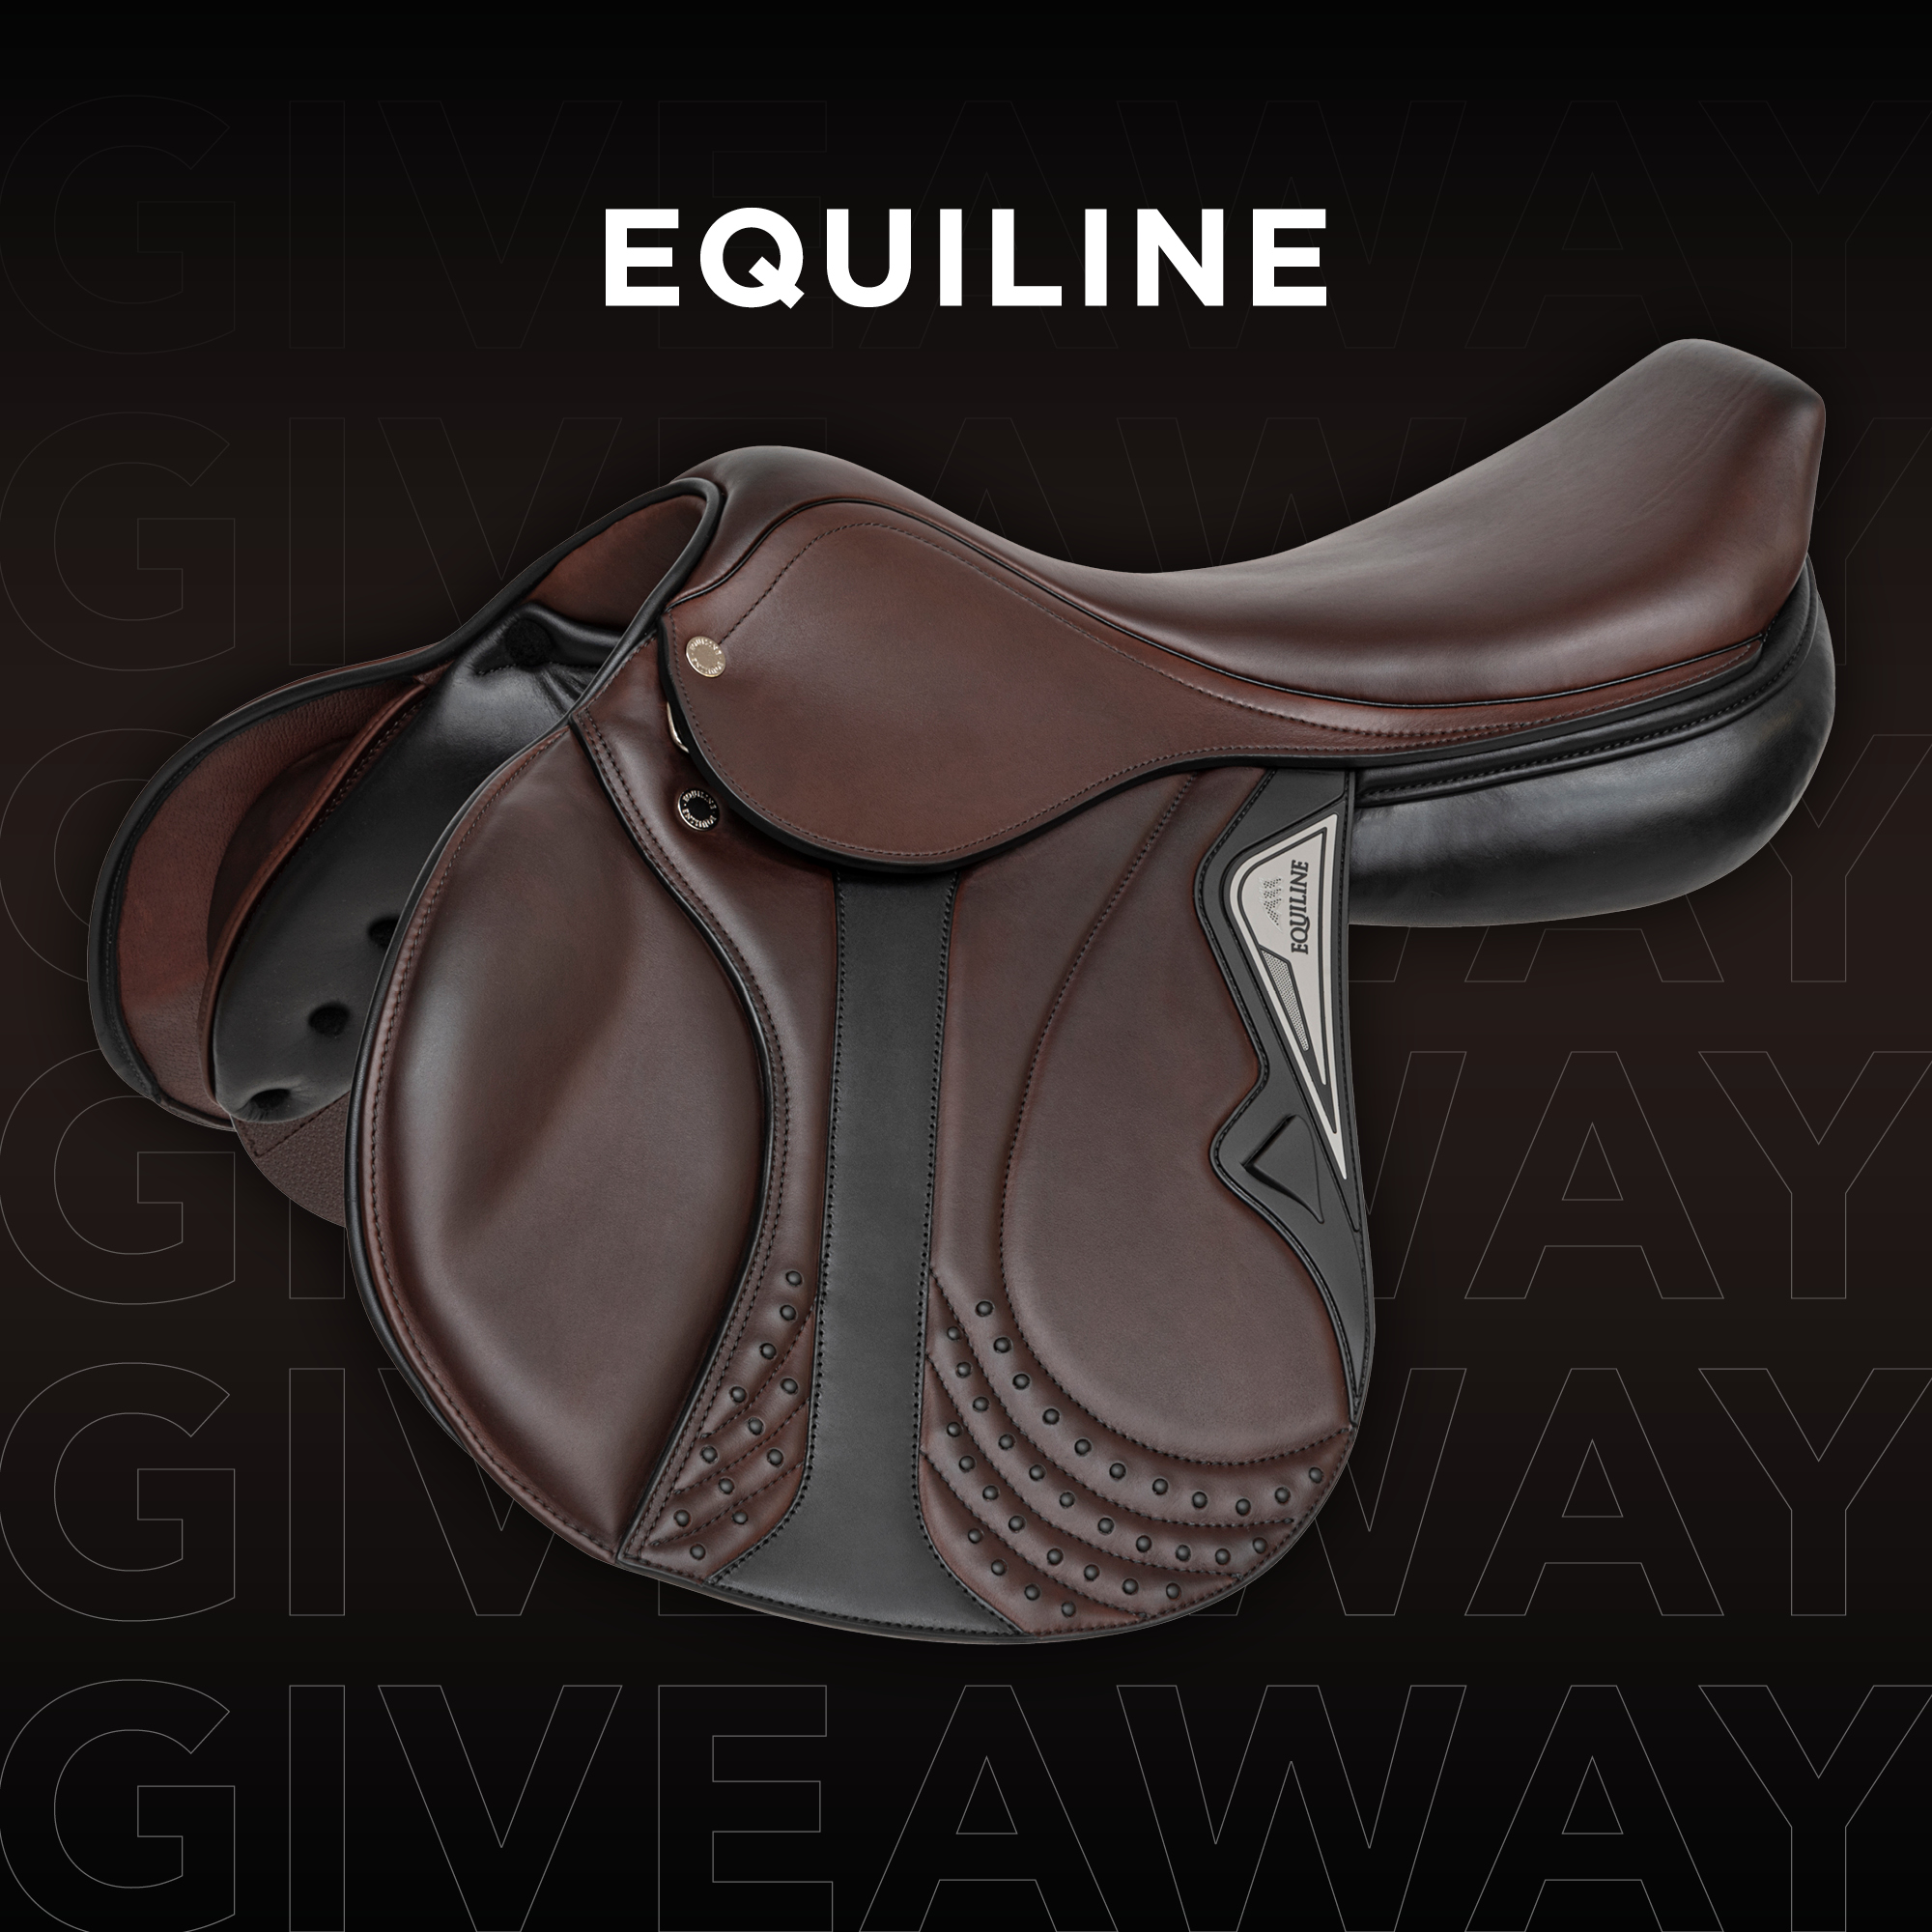 WIN a brand new Equiline Saddle as Equnews+ reader